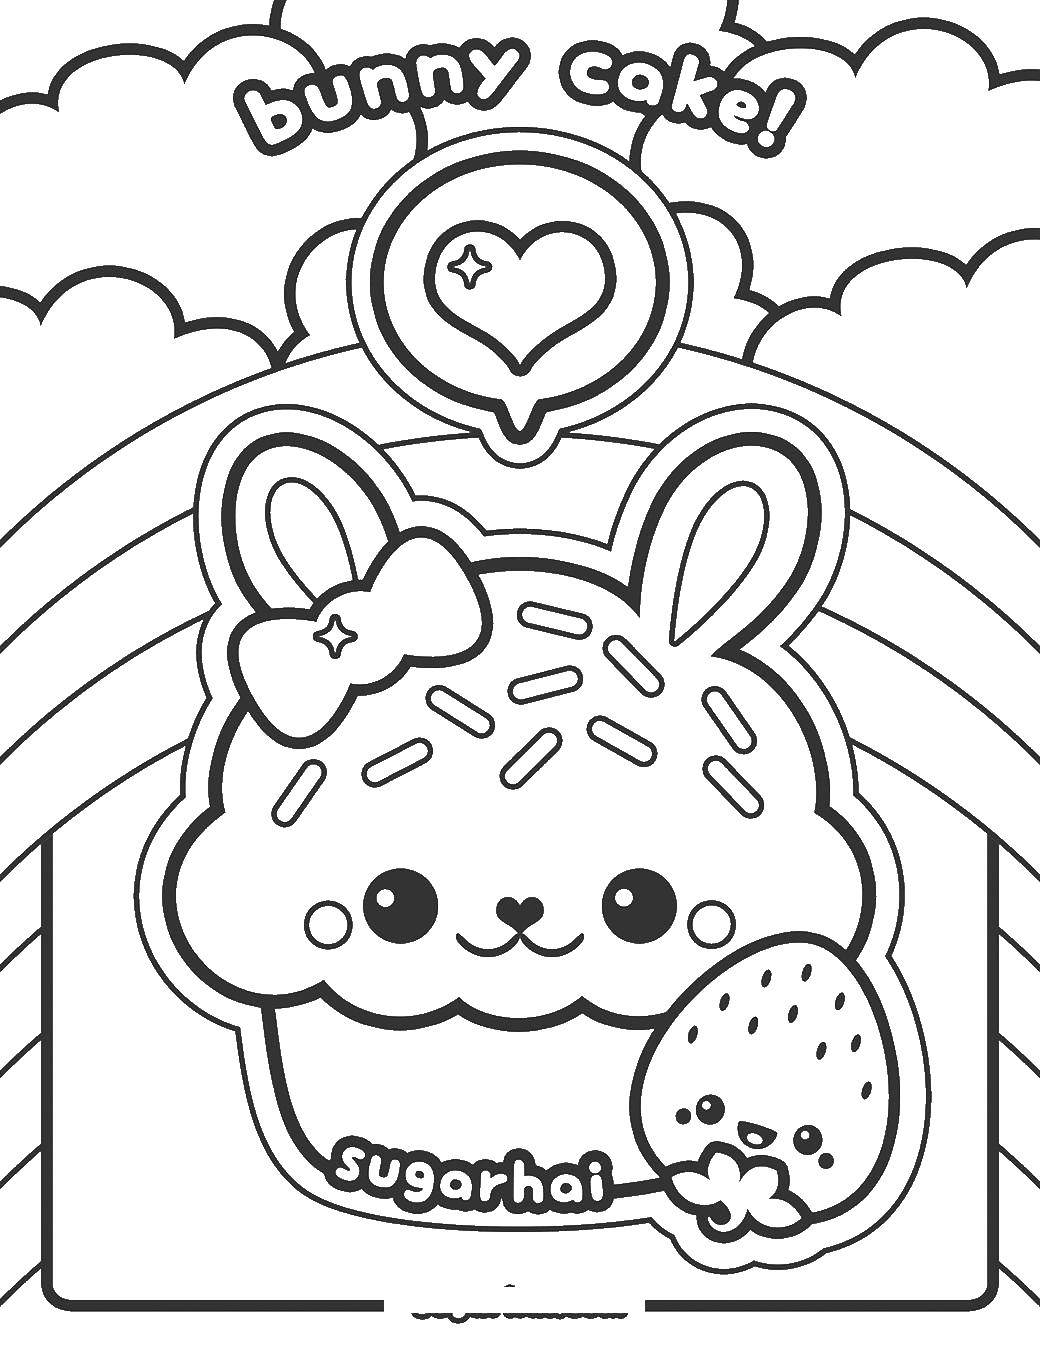 Coloring Cupcake Bunny. Category the rabbit. Tags:  rabbit, hare.